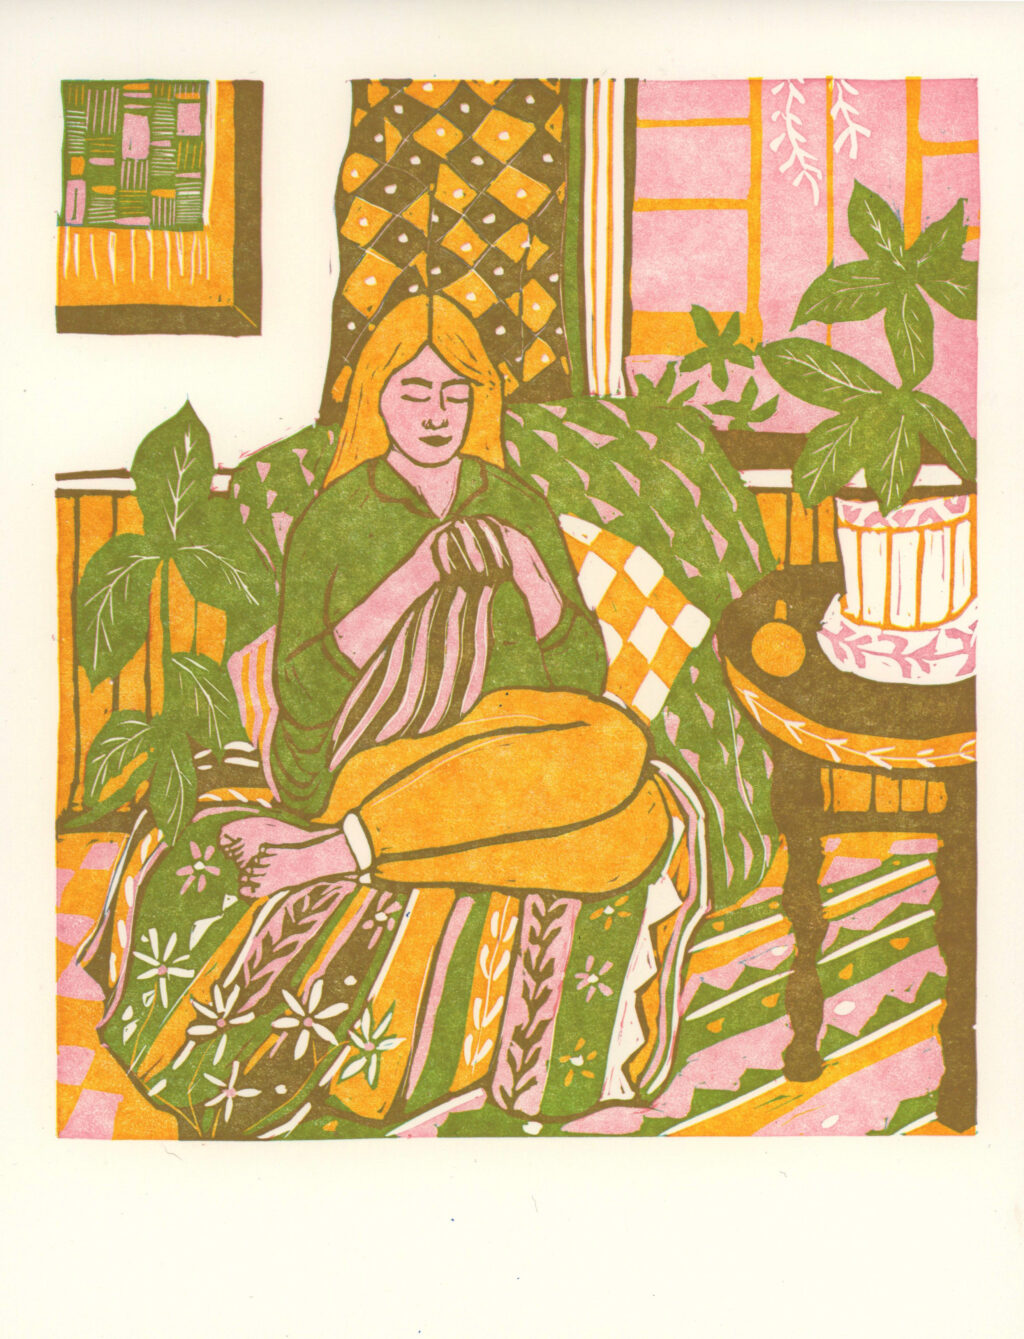 Print by Morgan Pinnock. A linocut in yellow, pink, green, and brown, depicting a figure with long golden hair is sewing a striped fabric, while sitting on a plush chair, in a room filled with brightly patterned cloth, and green plants.